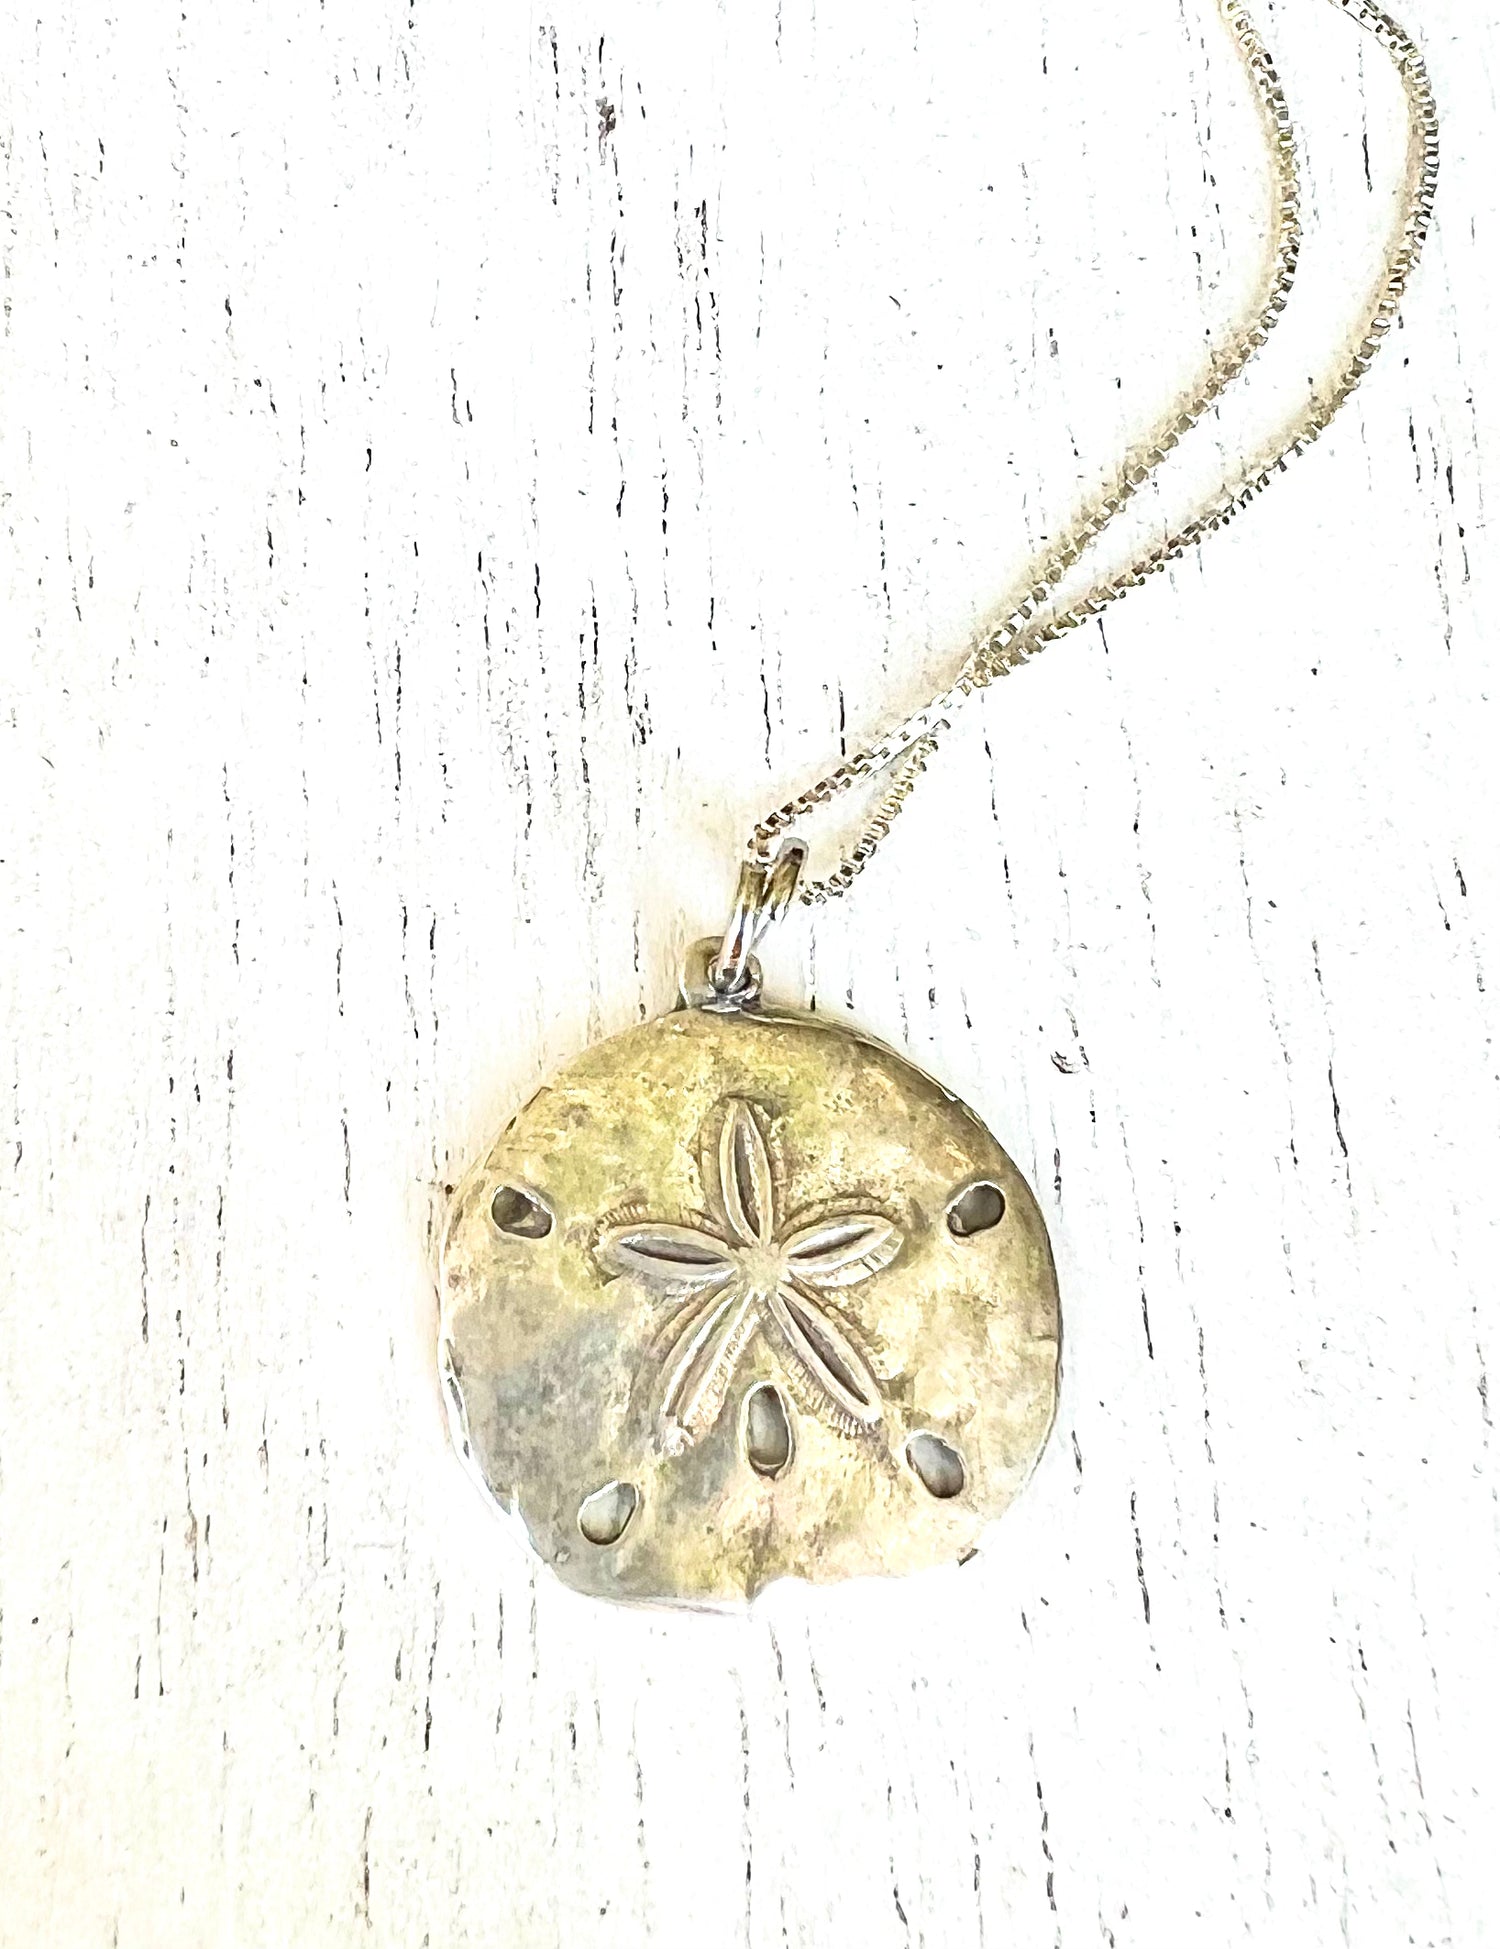 Sand Dollar Necklace, Bridesmaid Necklaces, Beach Wedding Gifts, Hawaiian Jewelry - Natashaaloha, jewelry, bracelets, necklace, keychains, fishing lures, gifts for men, charms, personalized, 